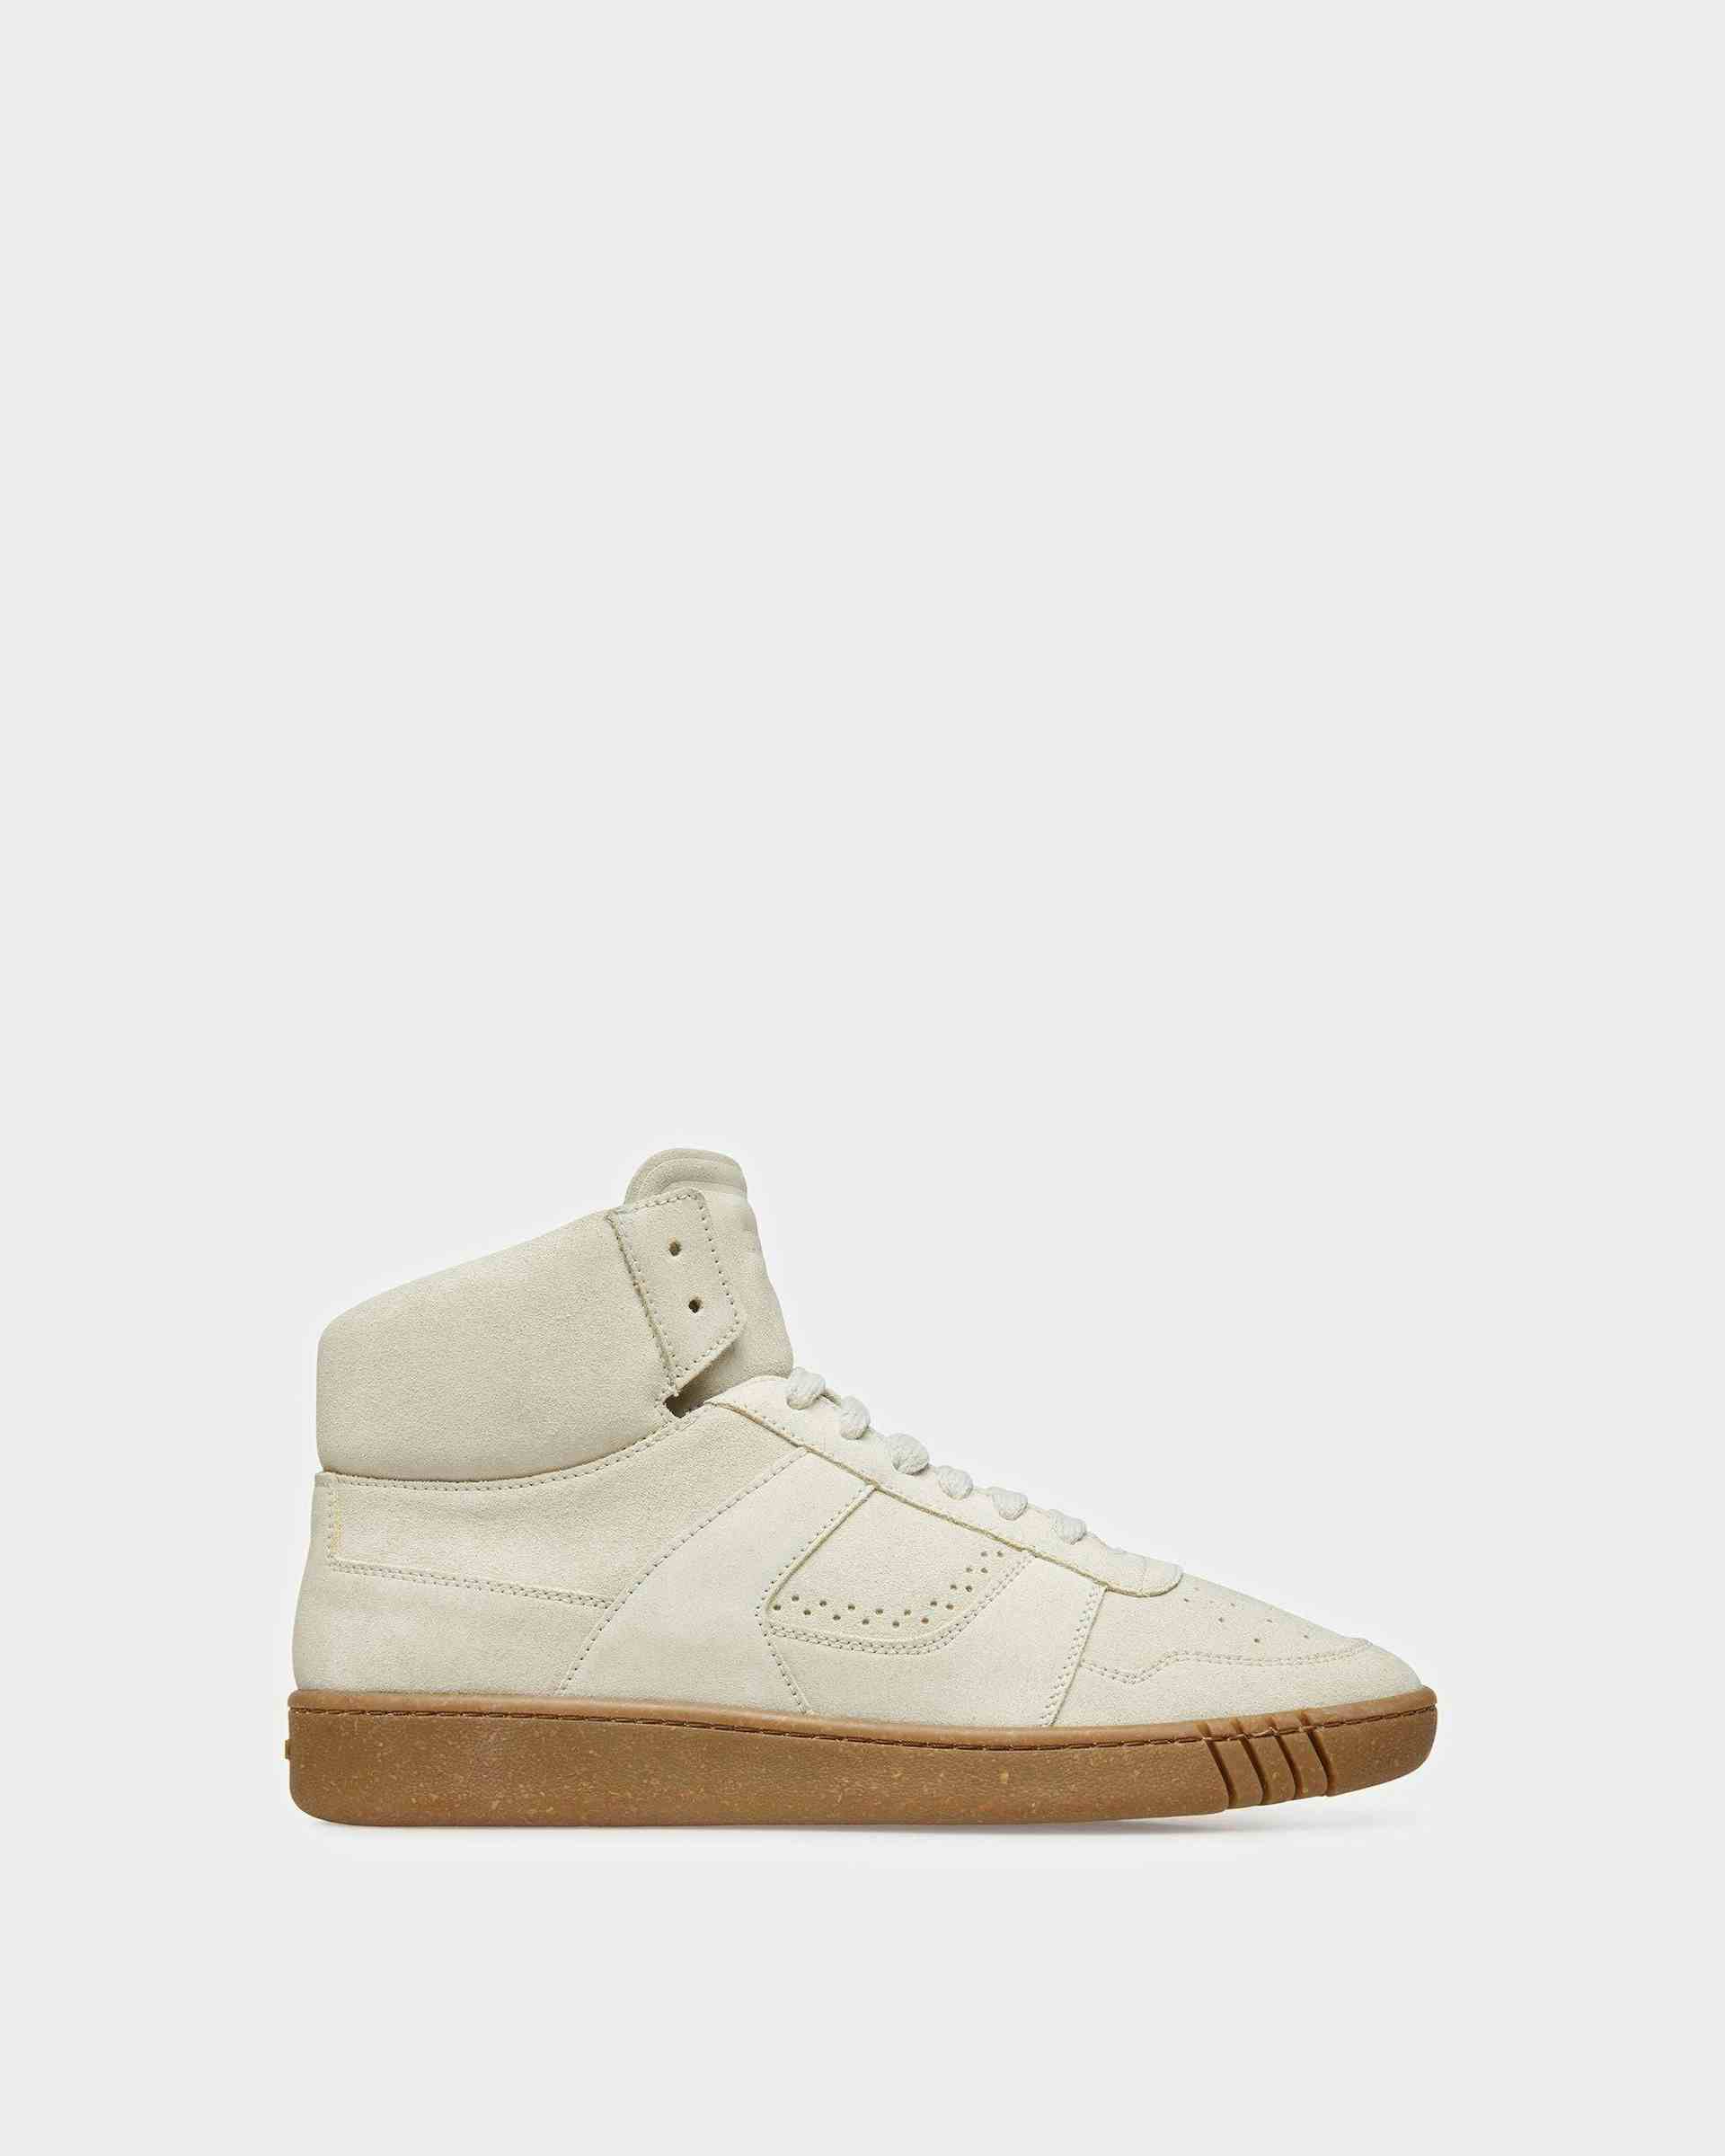 Wiggles Leather Sneakers In Dusty White - Men's - Bally